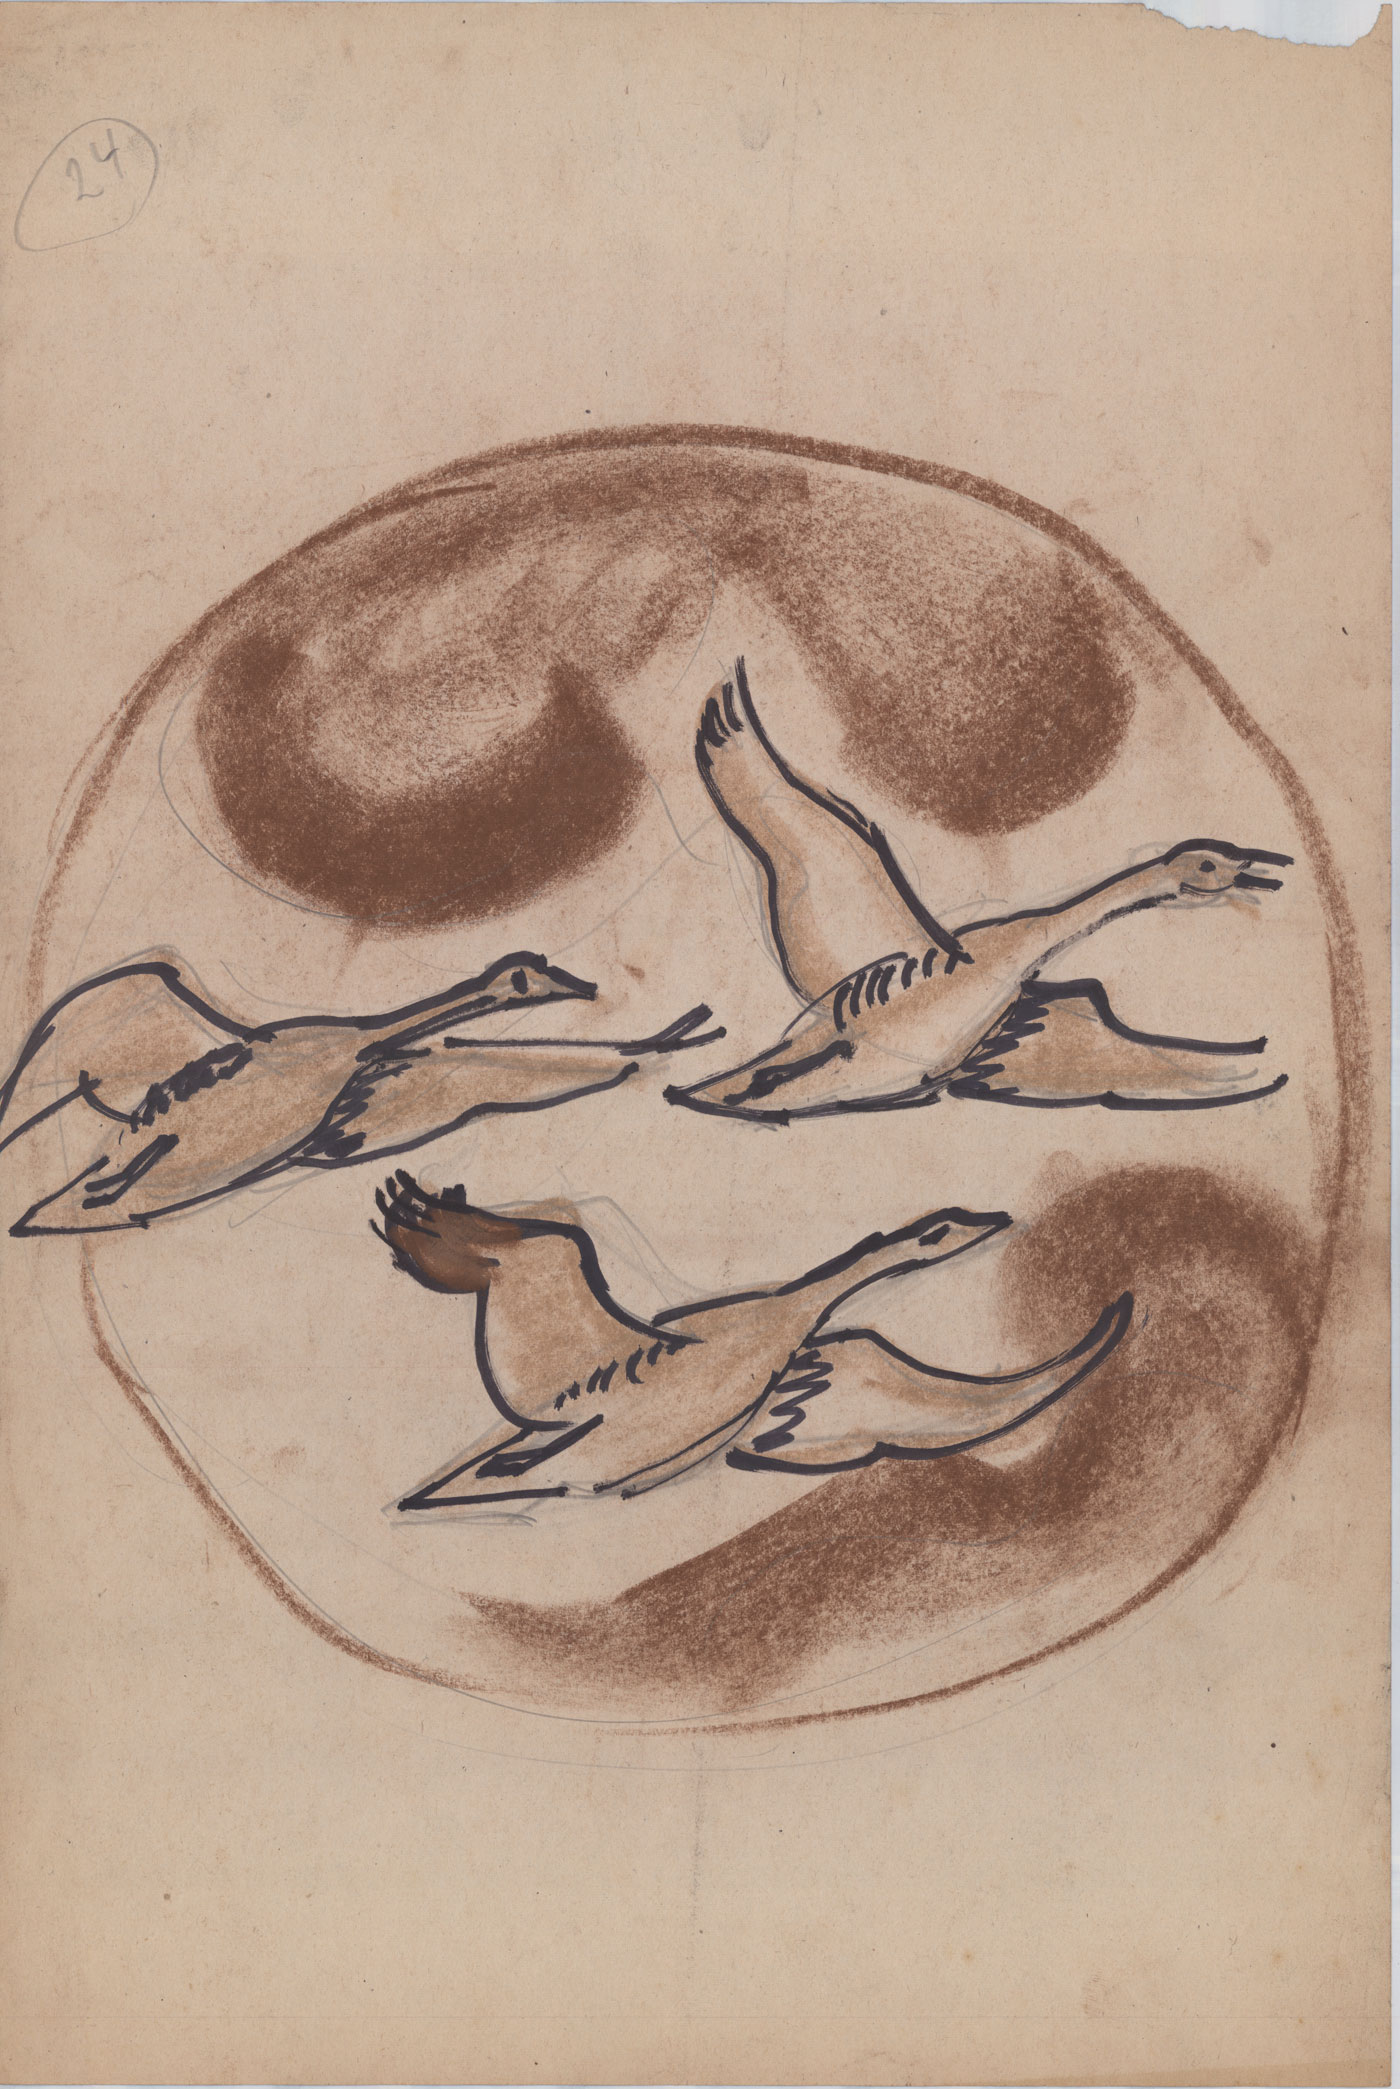 Flying geese stone art sketch by Heinz Warneke, 20th century. Courtesy Washington National Cathedral Construction Archives Collection.